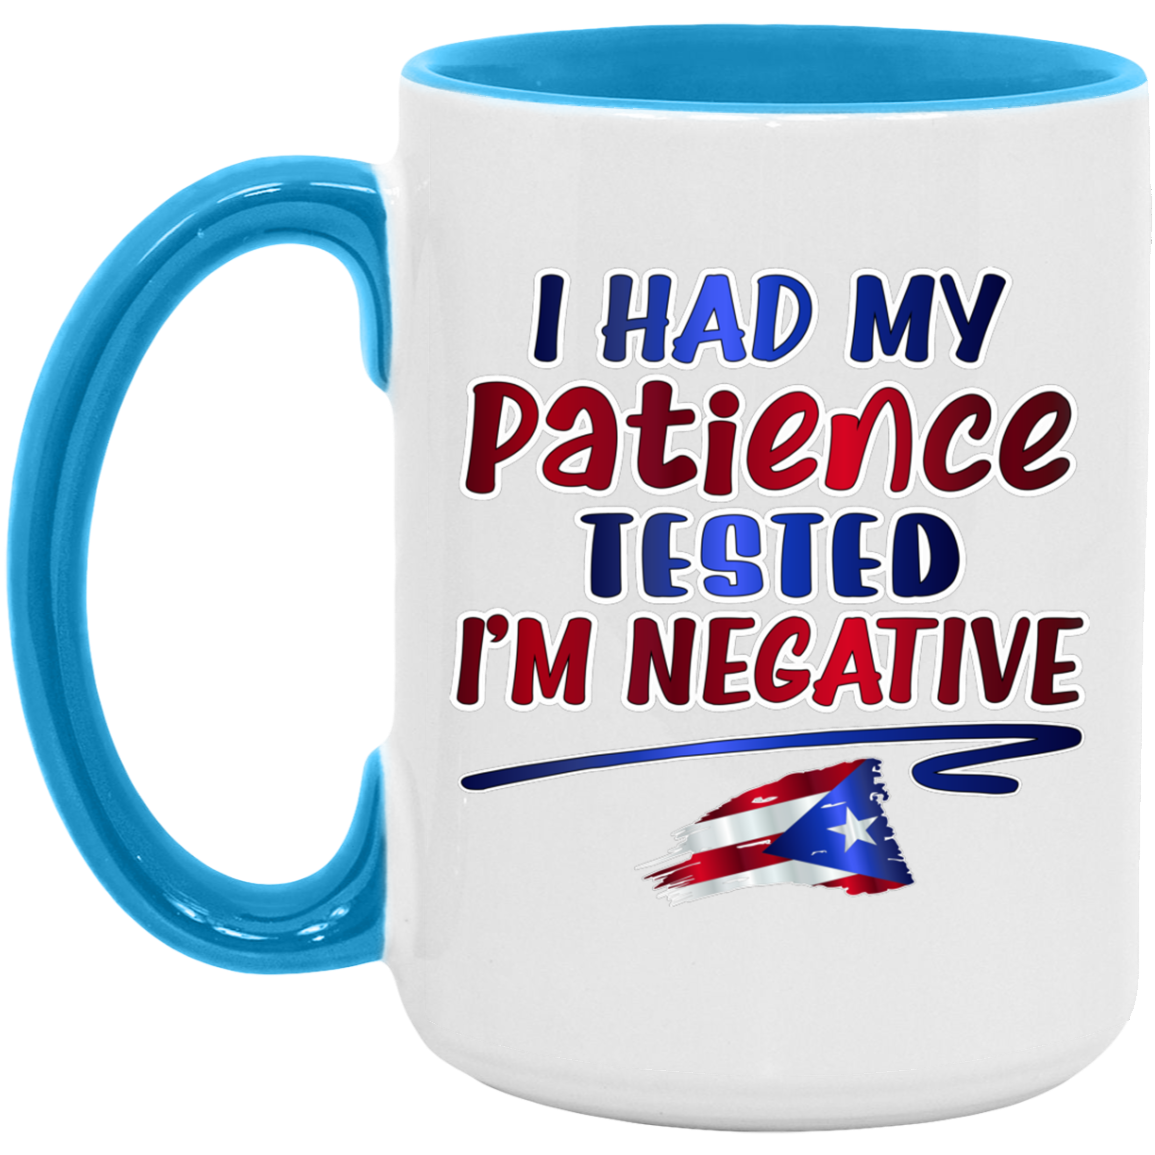 Patience Tested - Negative 15oz. Accent Mug